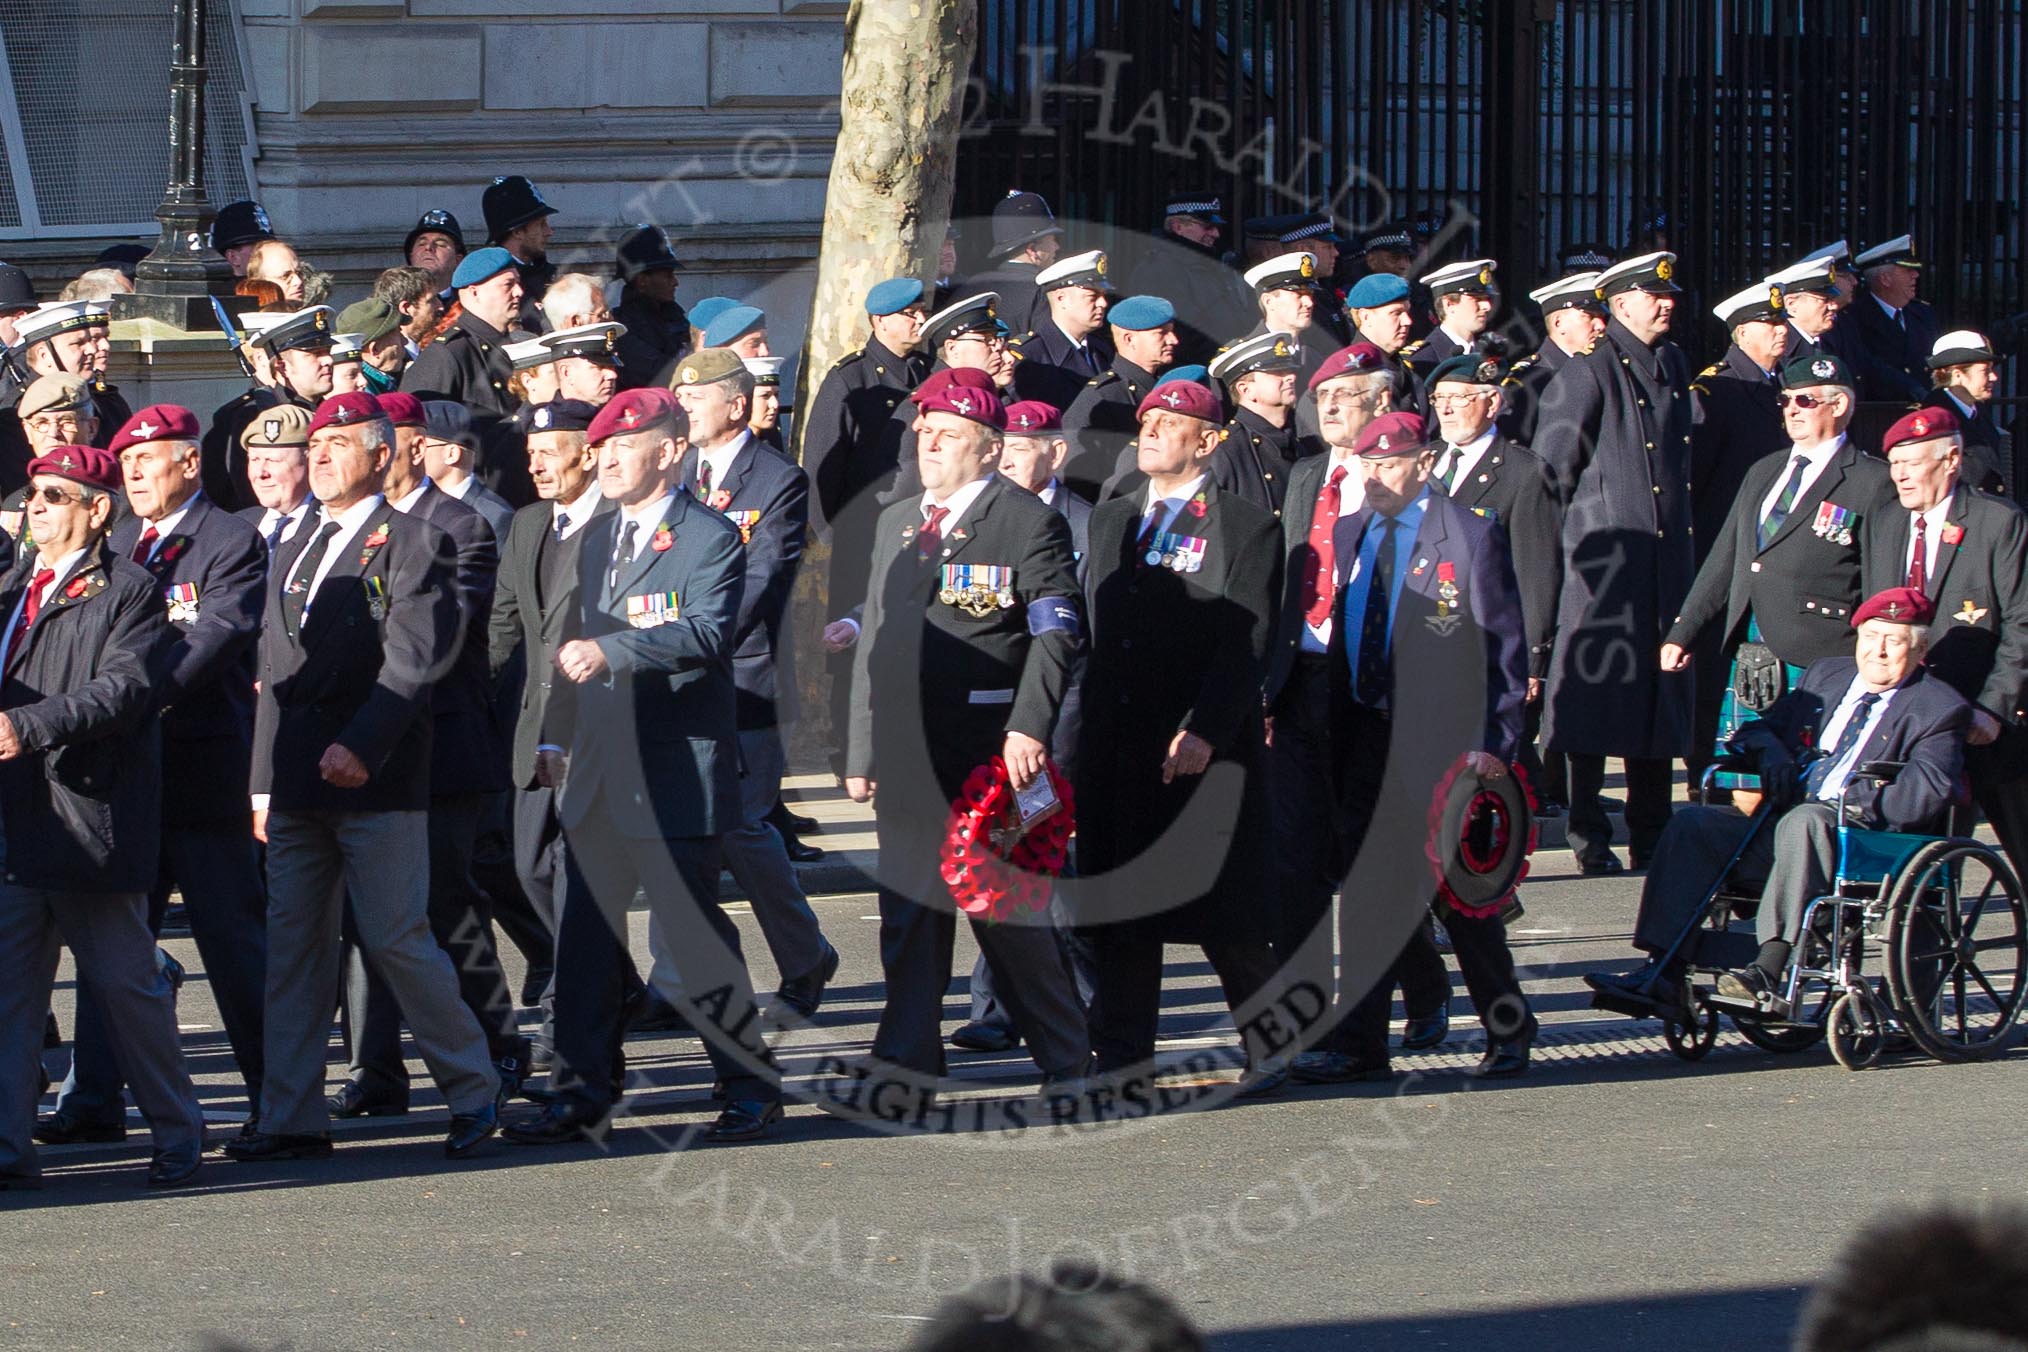 Remembrance Sunday 2012 Cenotaph March Past: Group A20 - Parachute Regimental Association..
Whitehall, Cenotaph,
London SW1,

United Kingdom,
on 11 November 2012 at 11:51, image #693